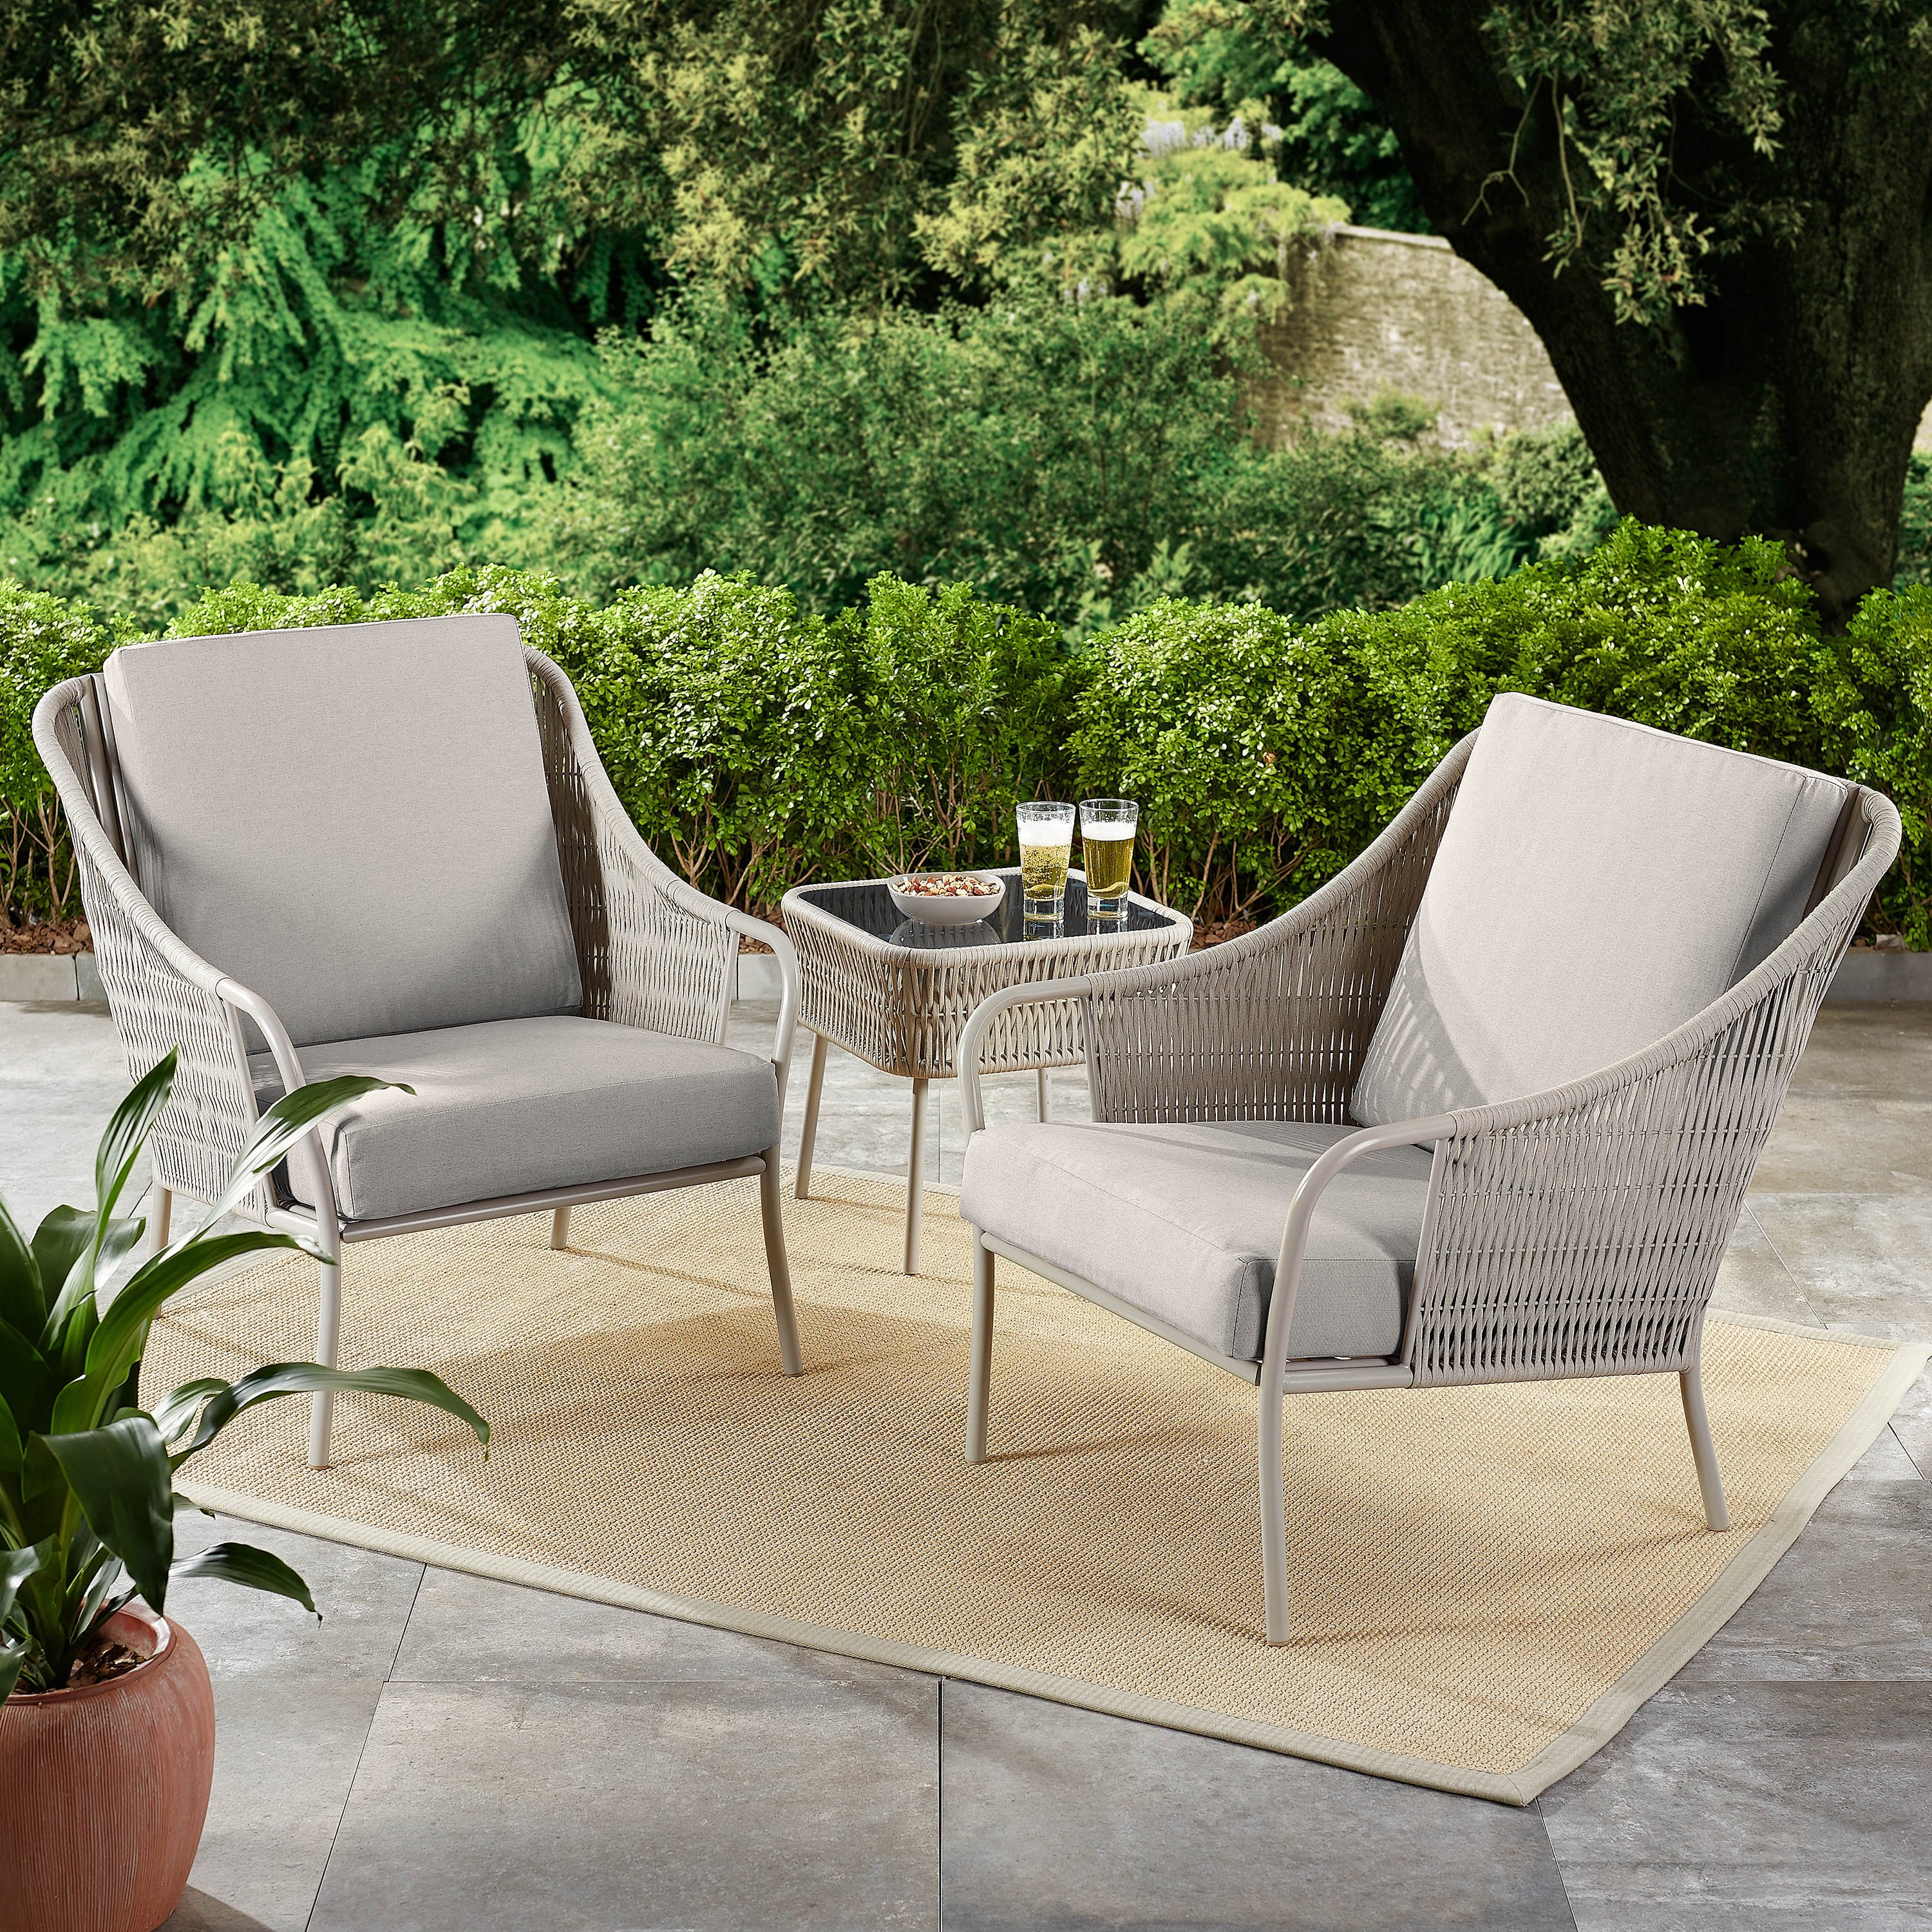 Patio Furniture Walmart intended for dimensions 3000 X 3000